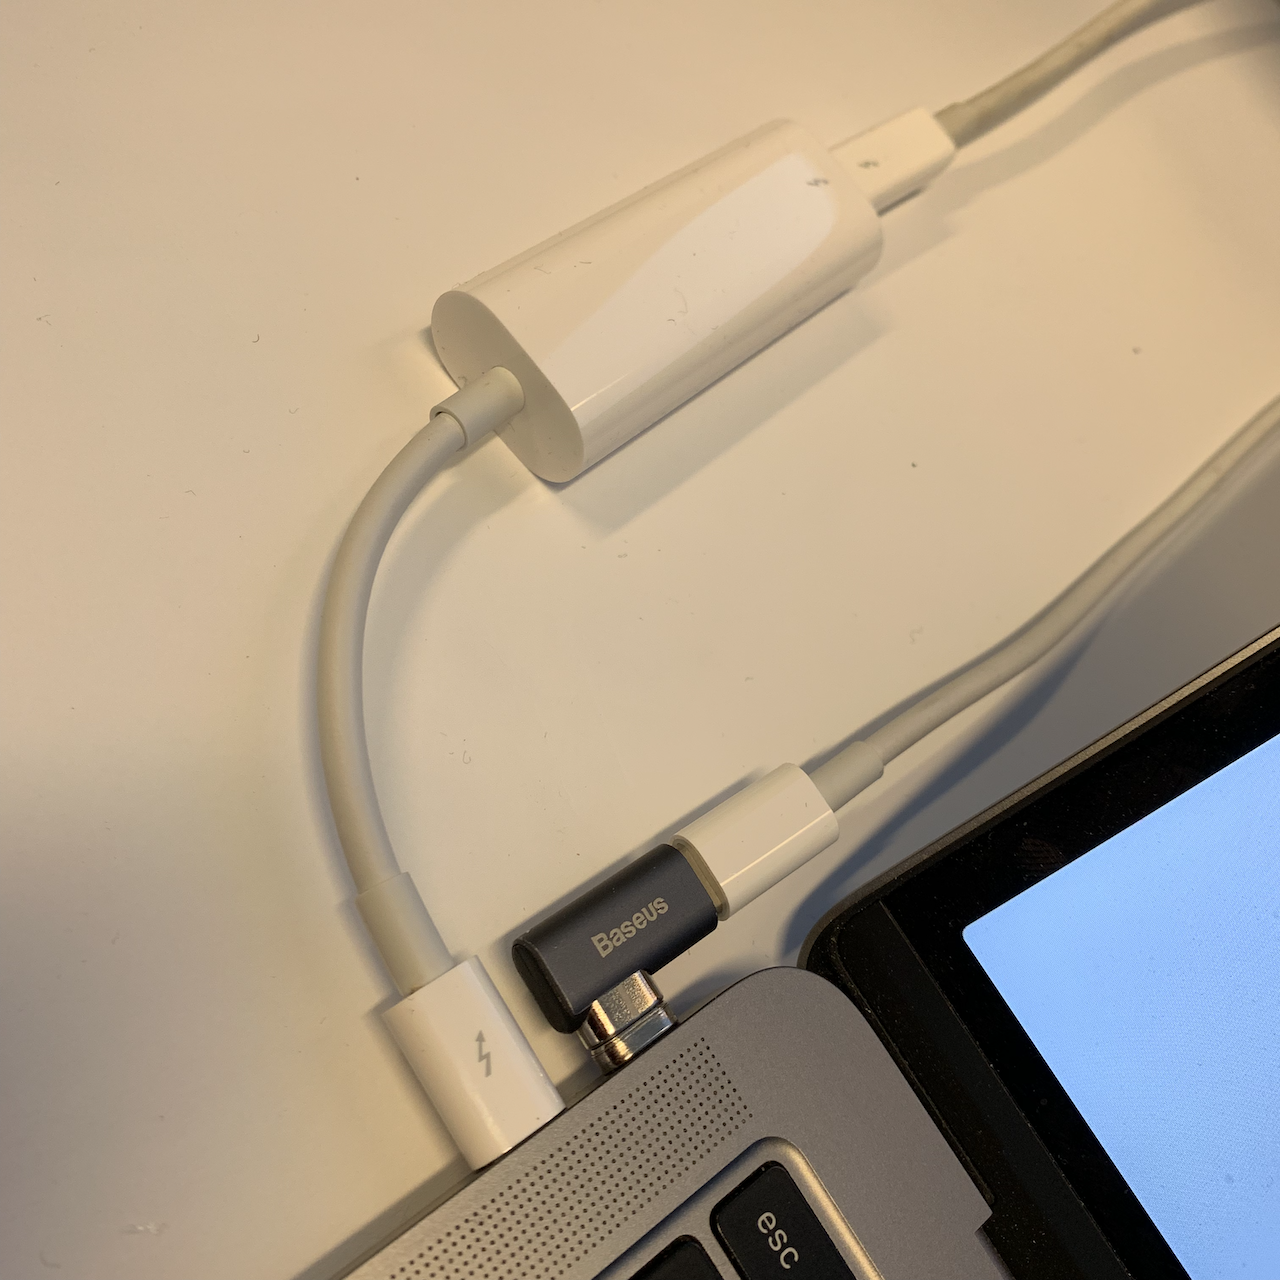 No charging with Apple Thunderbolt - Apple Community